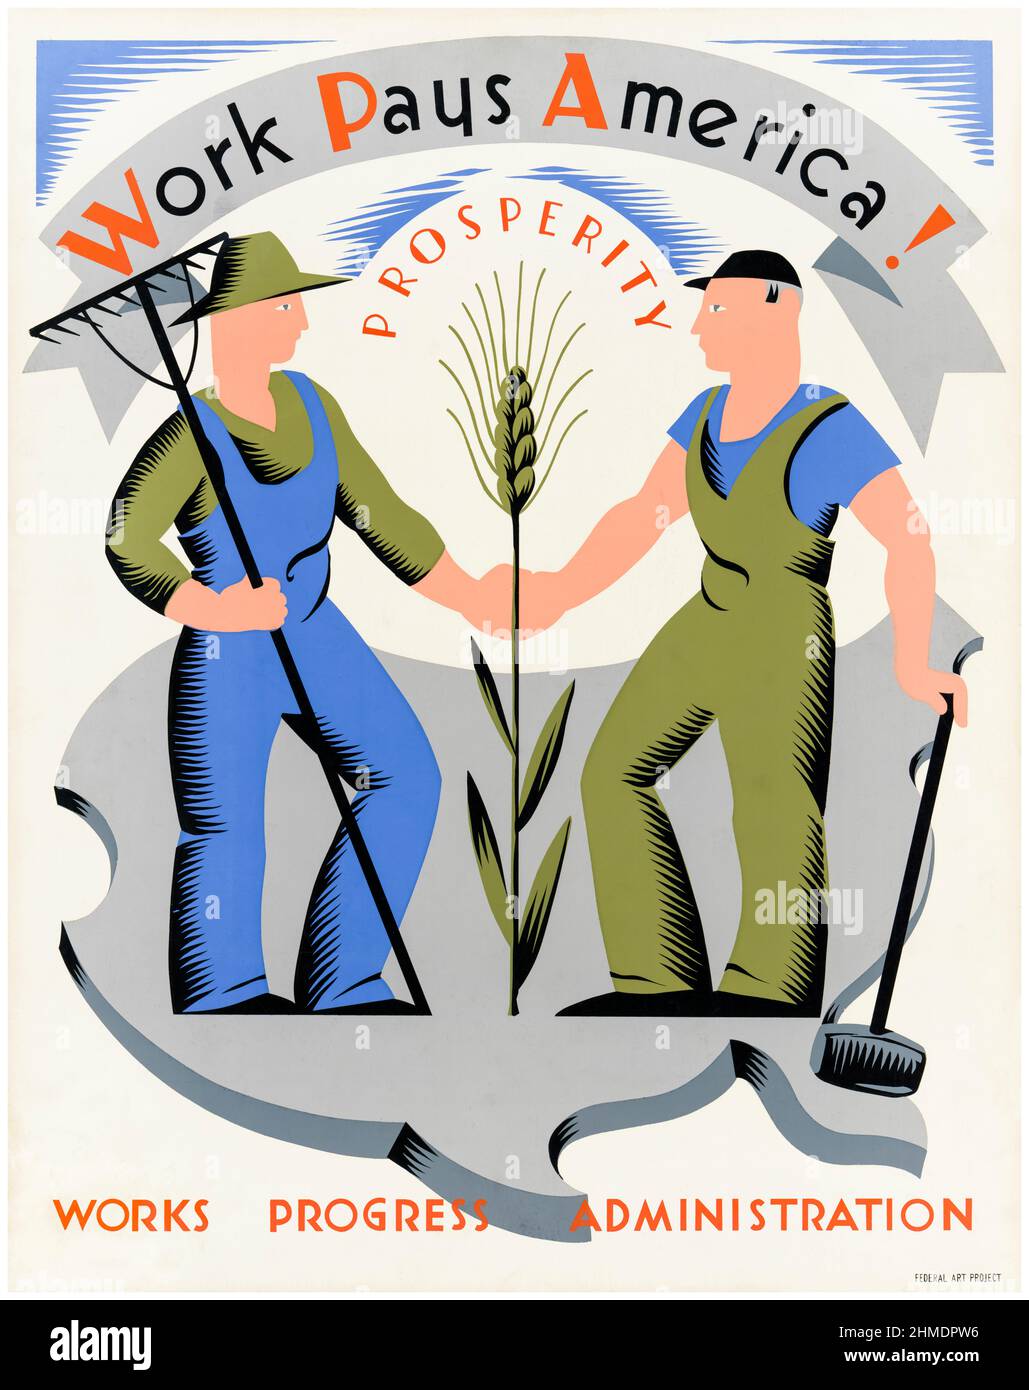 Work pays America!, Prosperity, (farmer and labourer), American poster promoting economic growth through work by the Works Progress Administration artist Vera Bock, 1936-1941 Stock Photo